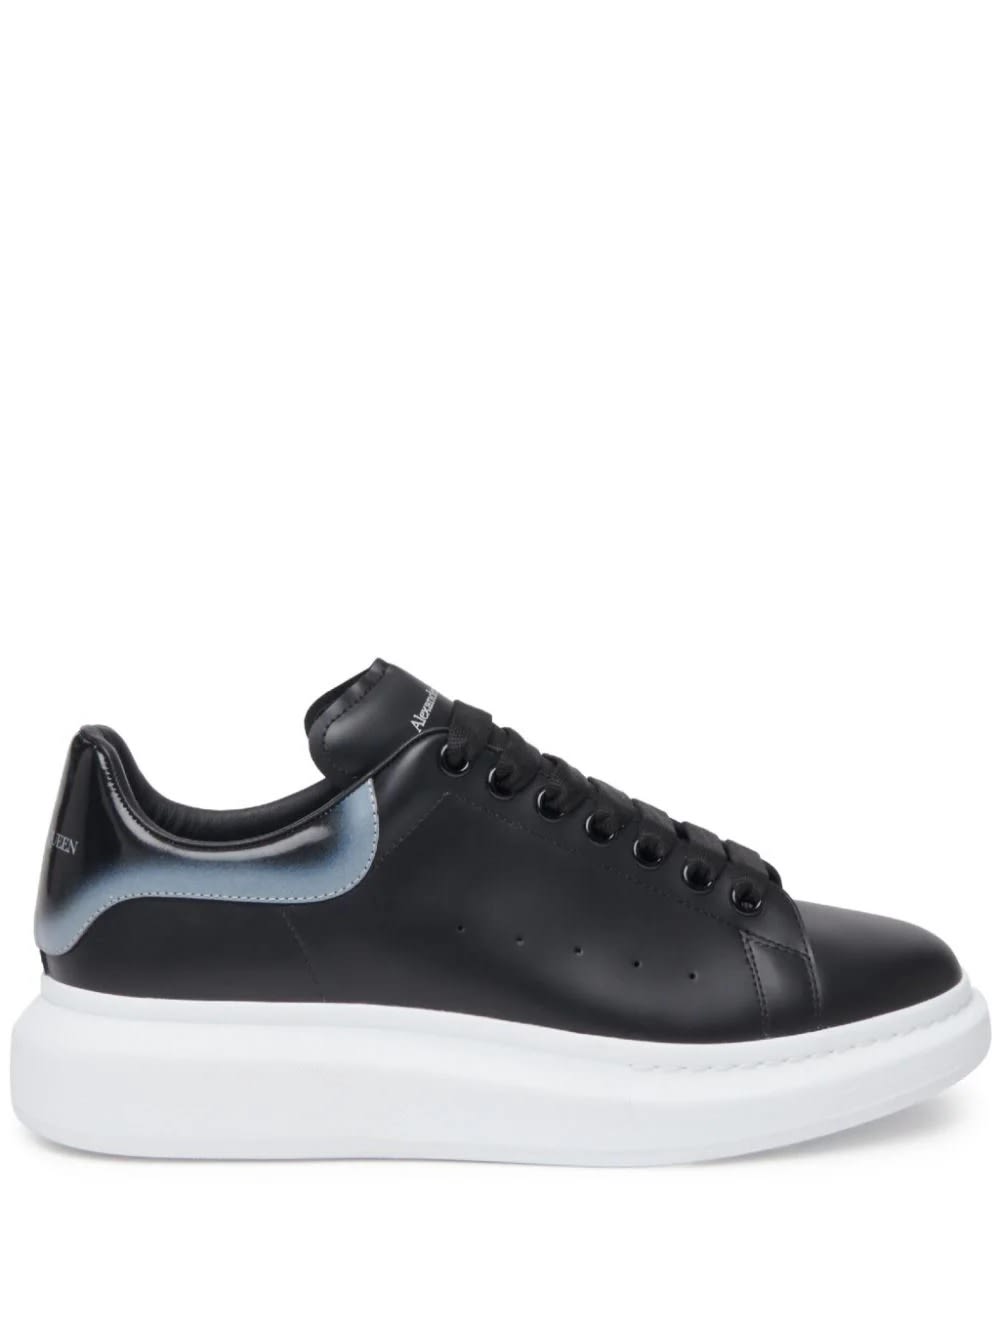 Alexander Mcqueen Oversized Sneakers In Black And Silver